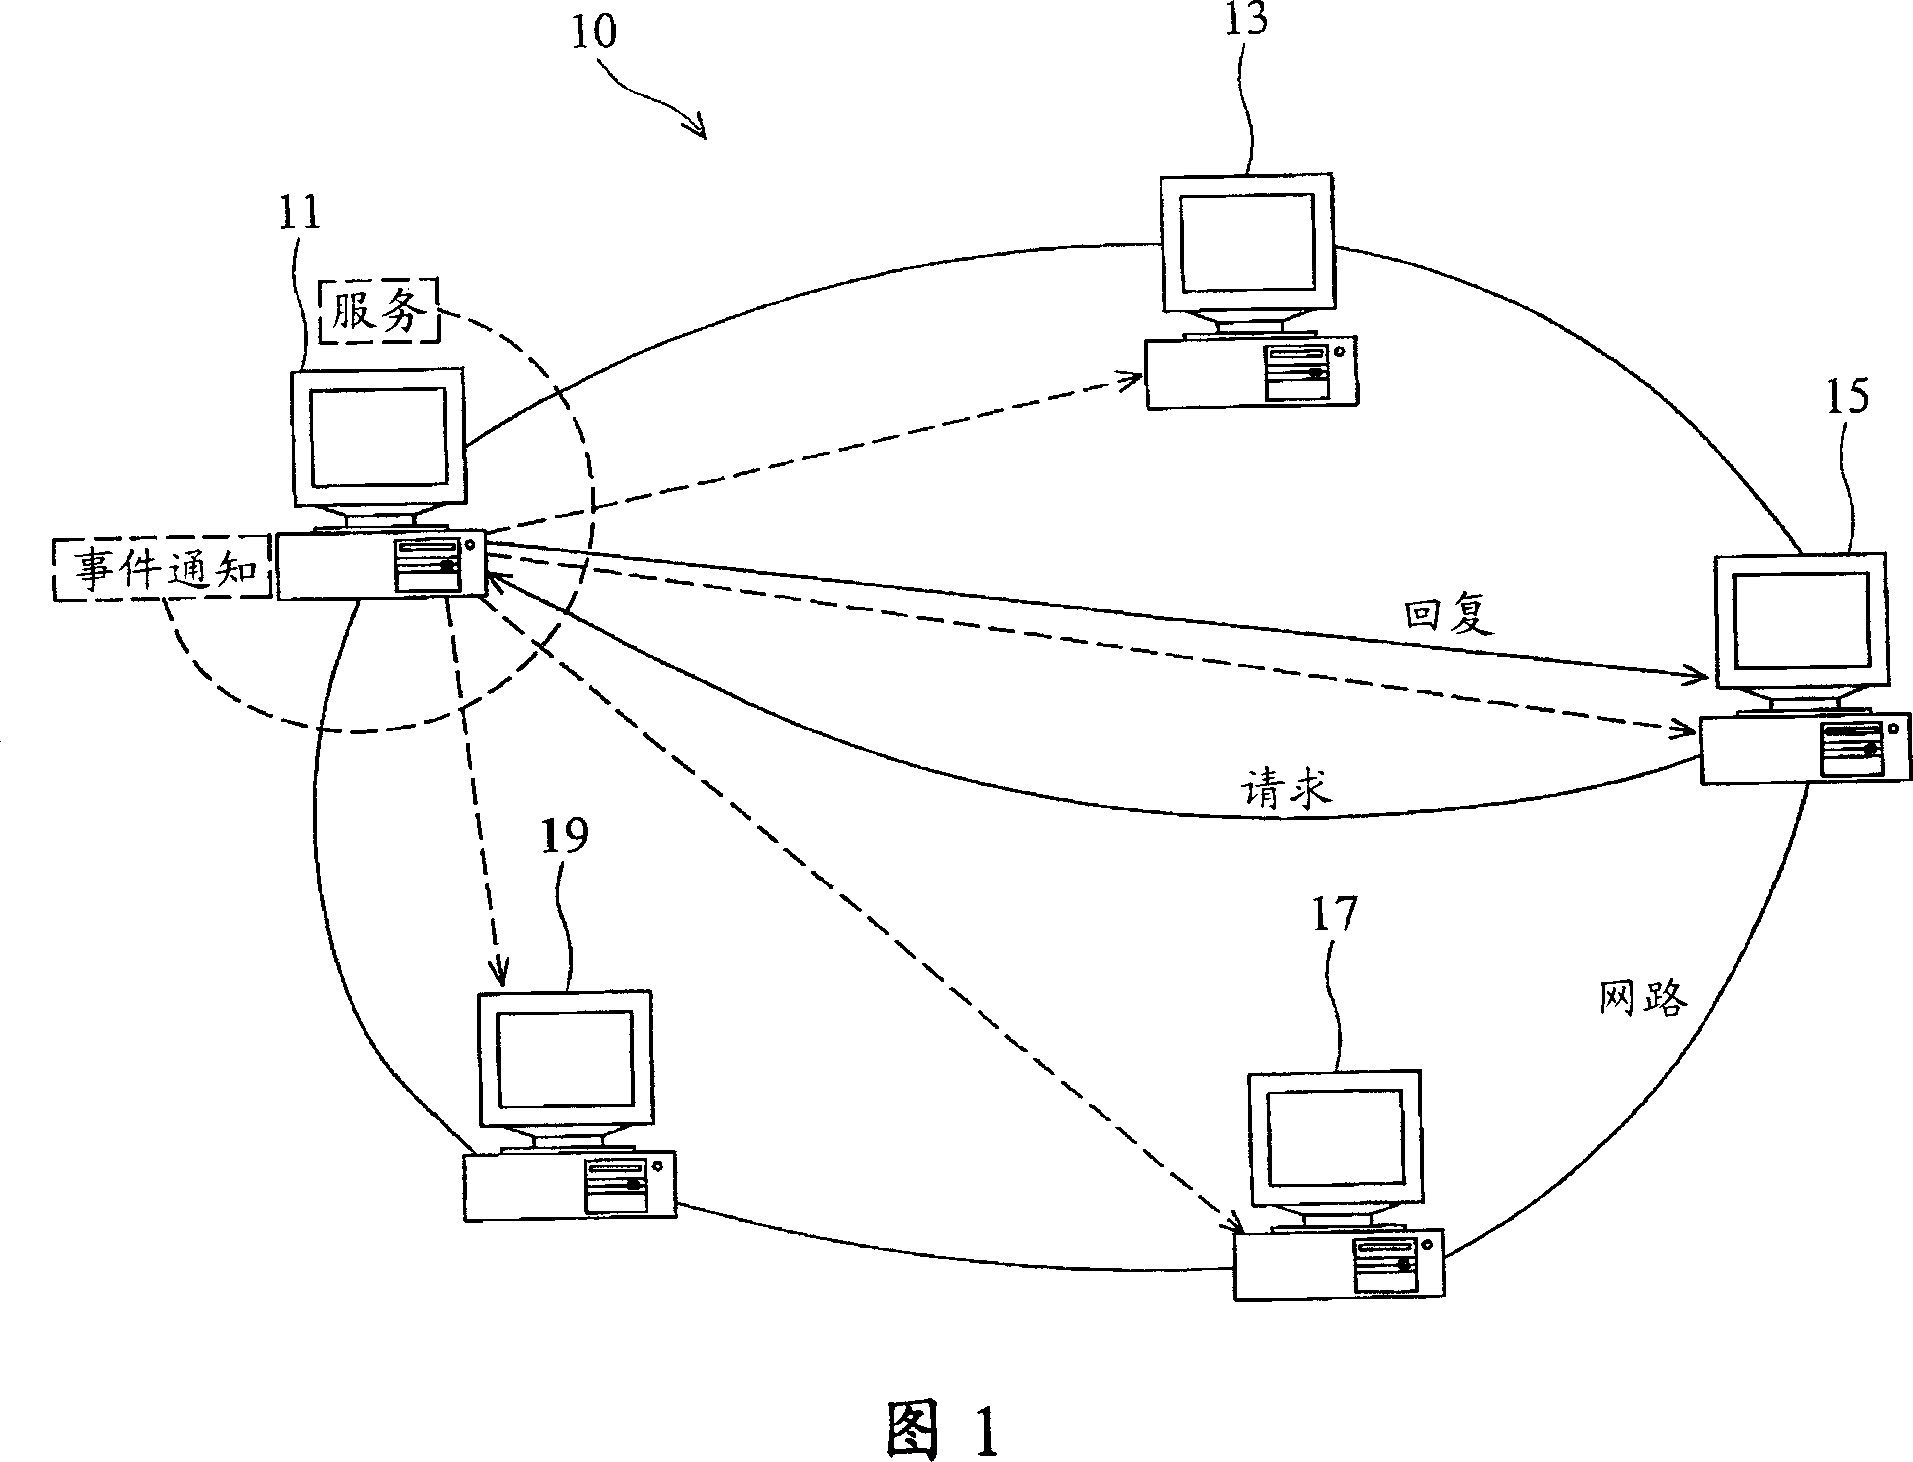 State synchronous system and method